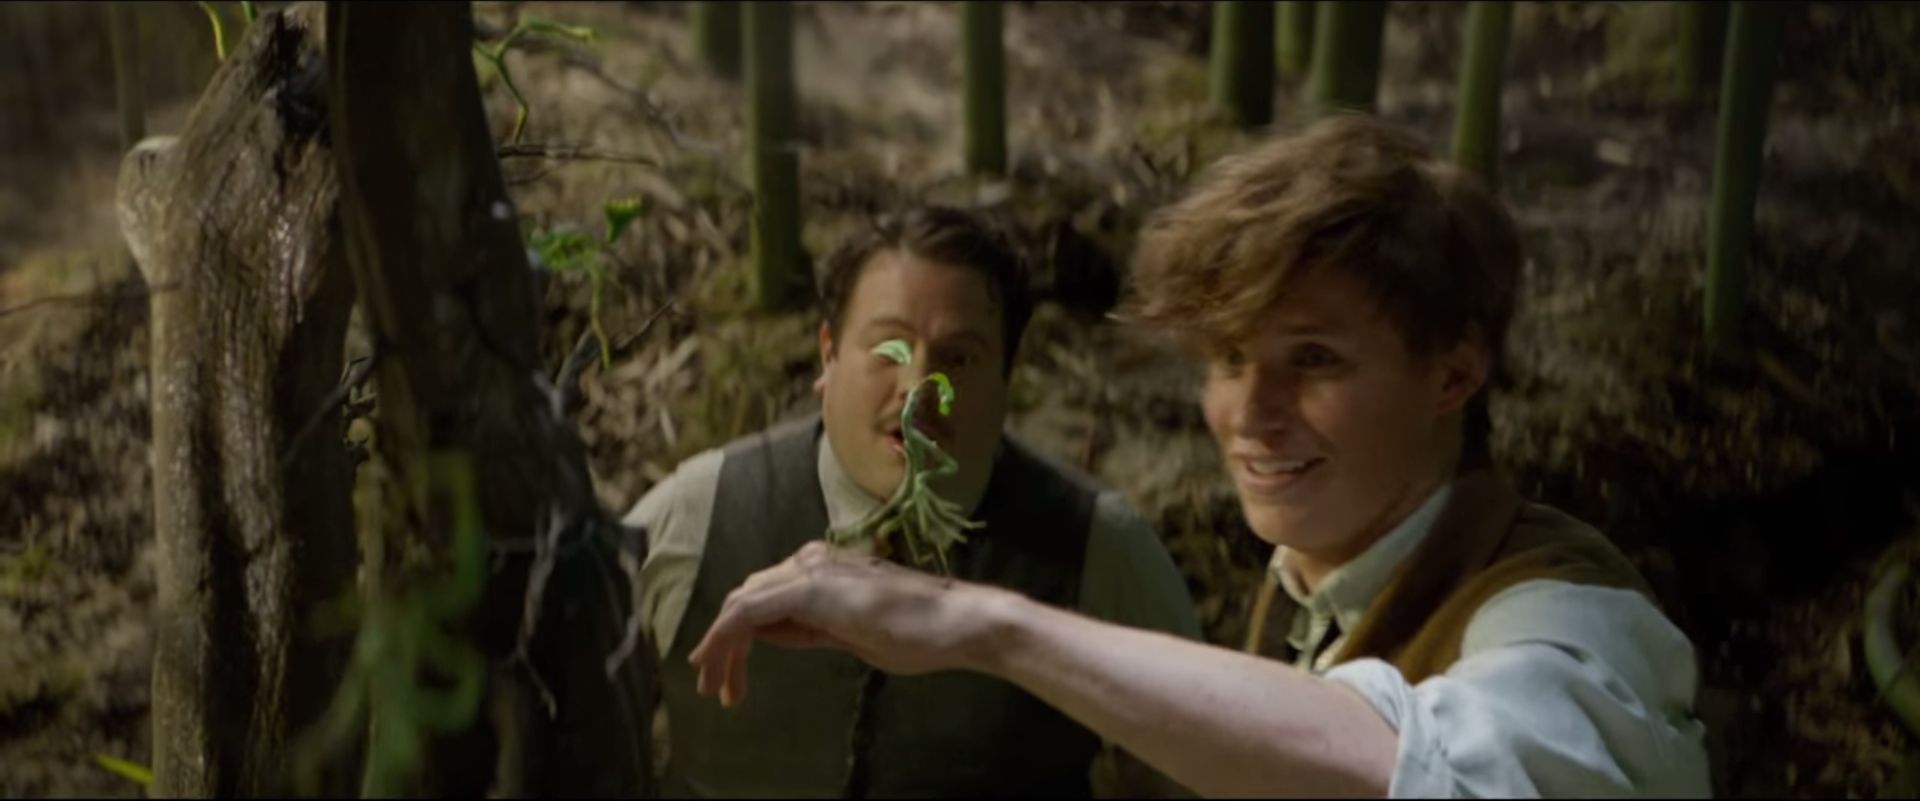 Watch Fantastic Beasts And Where To Find Them 1080P 2016 Online Film